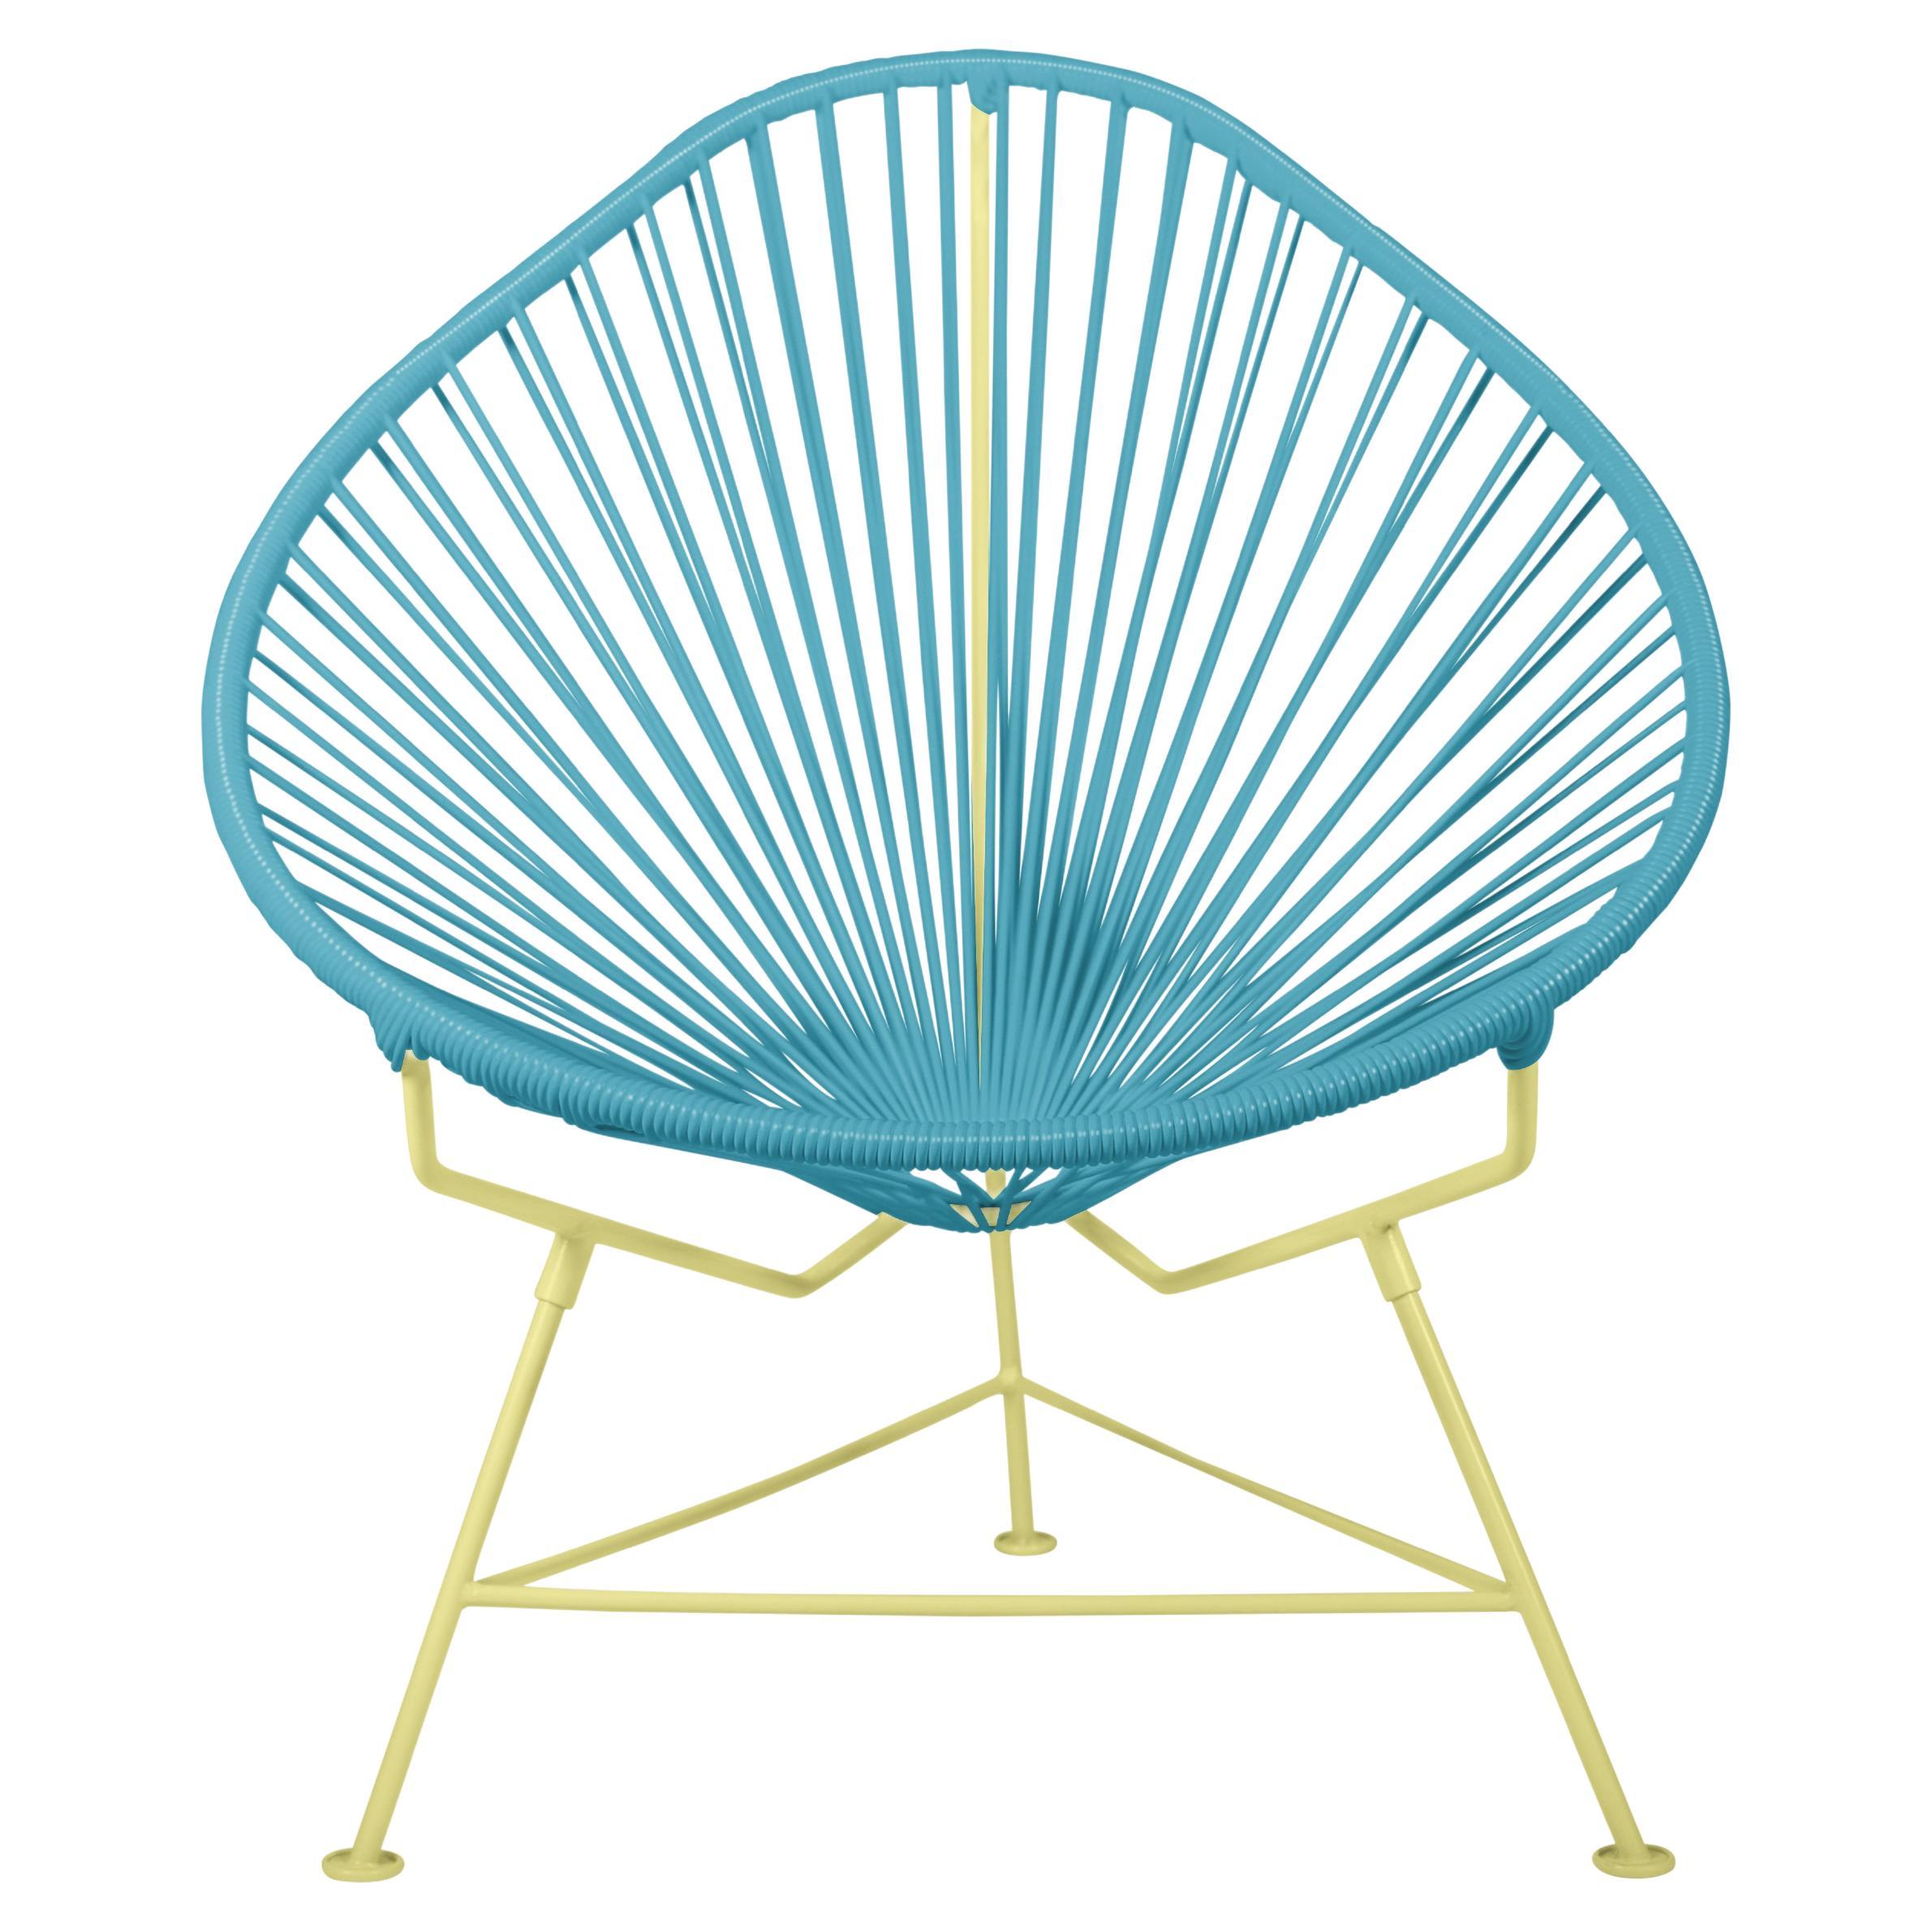 Innit Designs Acapulco Chair Blue Weave on Yellow Frame For Sale